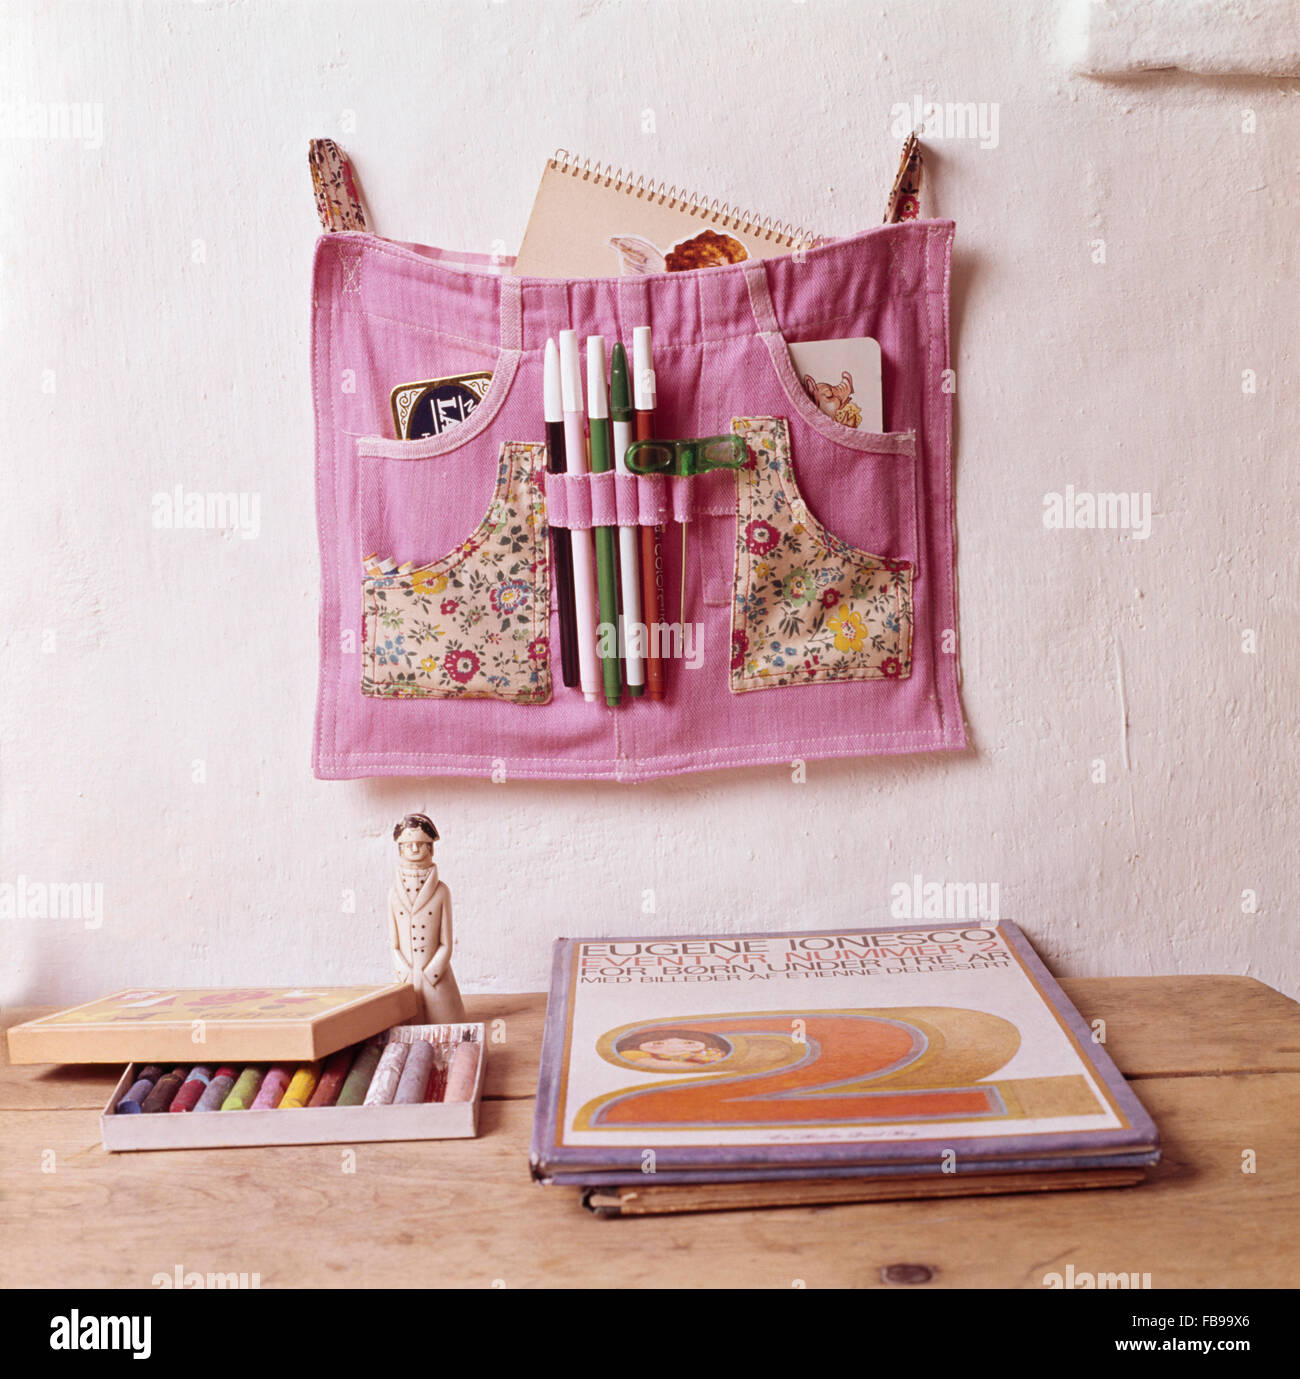 Pink denim shorts made into wall storage for pens and notebooks Stock Photo